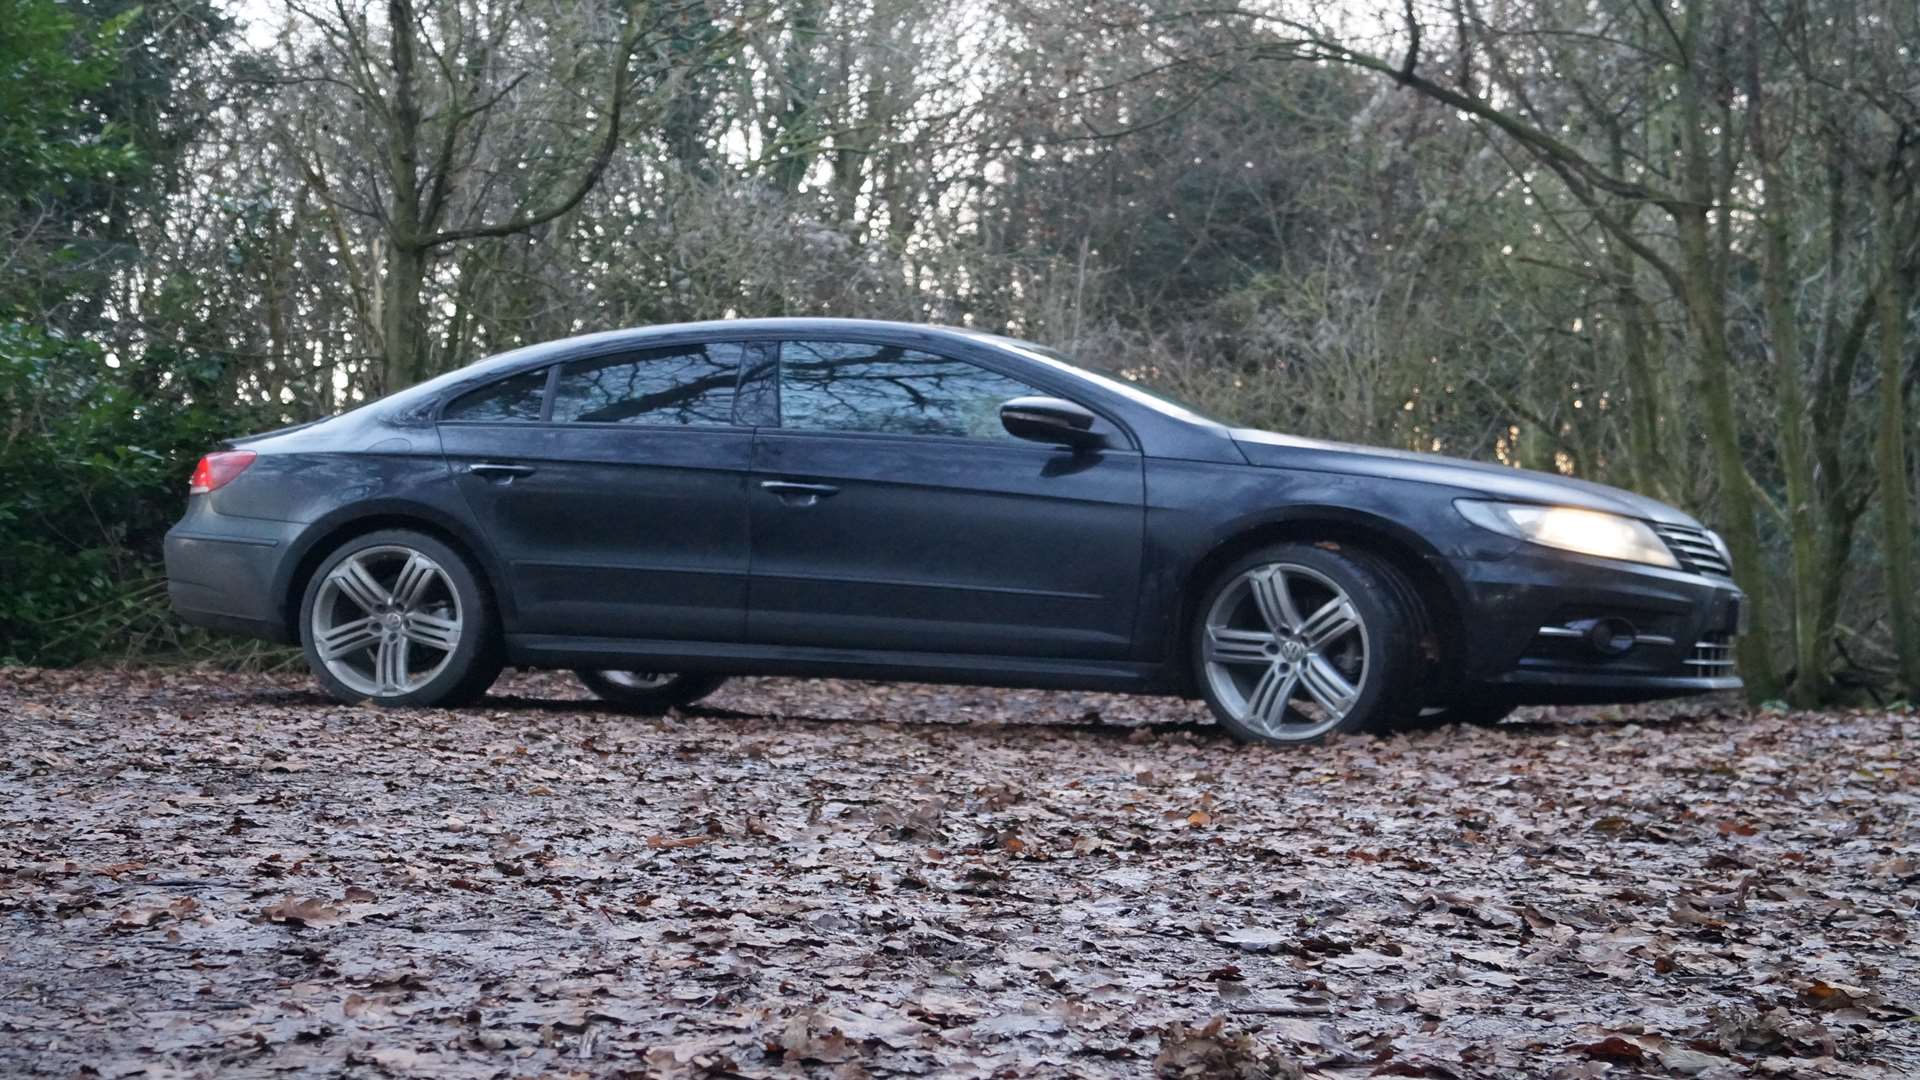 The CC combines a coupe-like profile with the practicality of a saloon